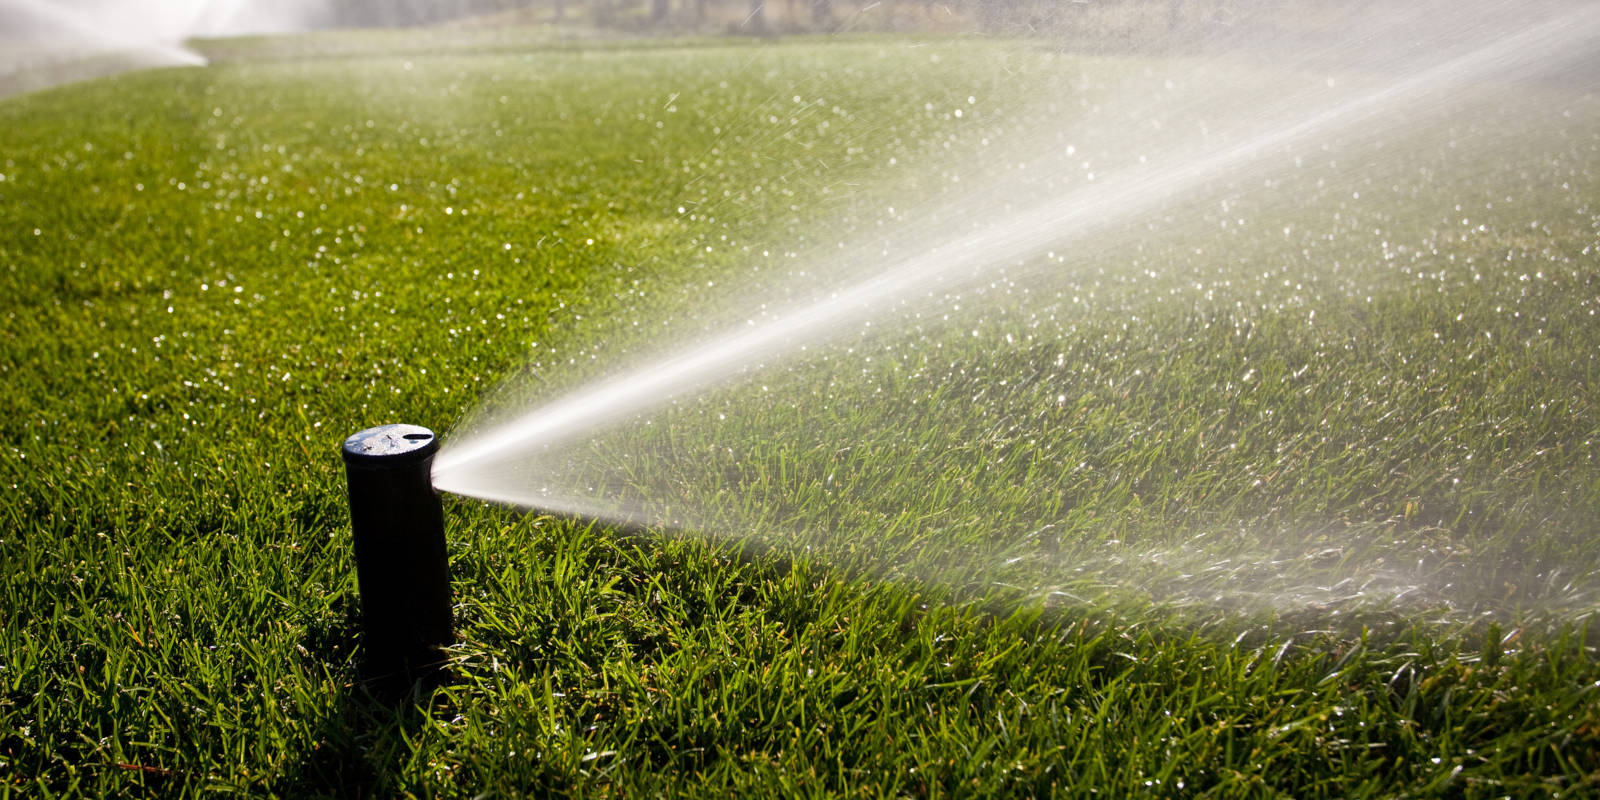 Schedule your spring irrigation appointment